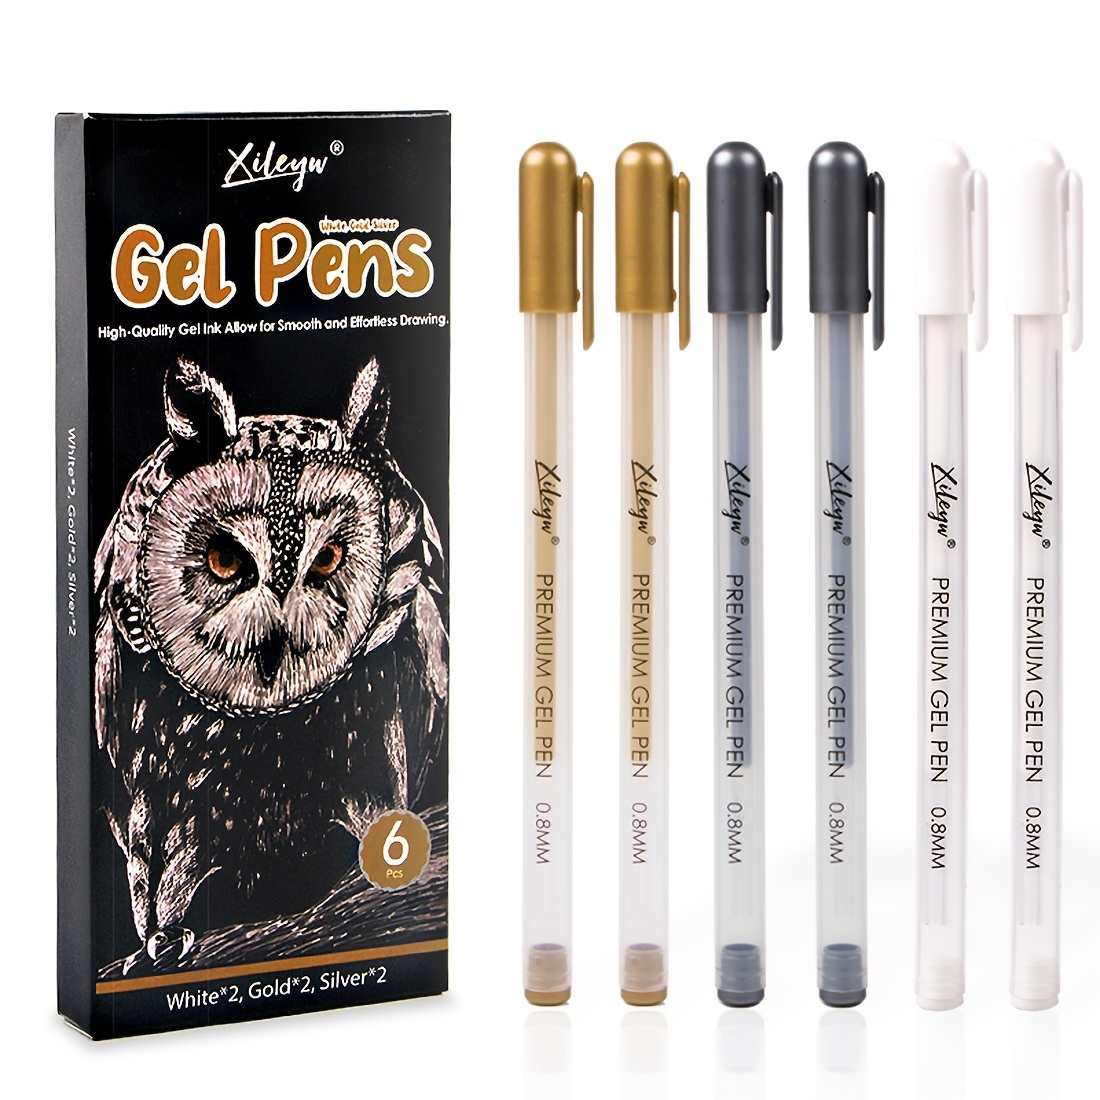 Bold 60 Gel Pens Set Colored Gel Pen plus for Adults Coloring Books Drawing  Art Markers